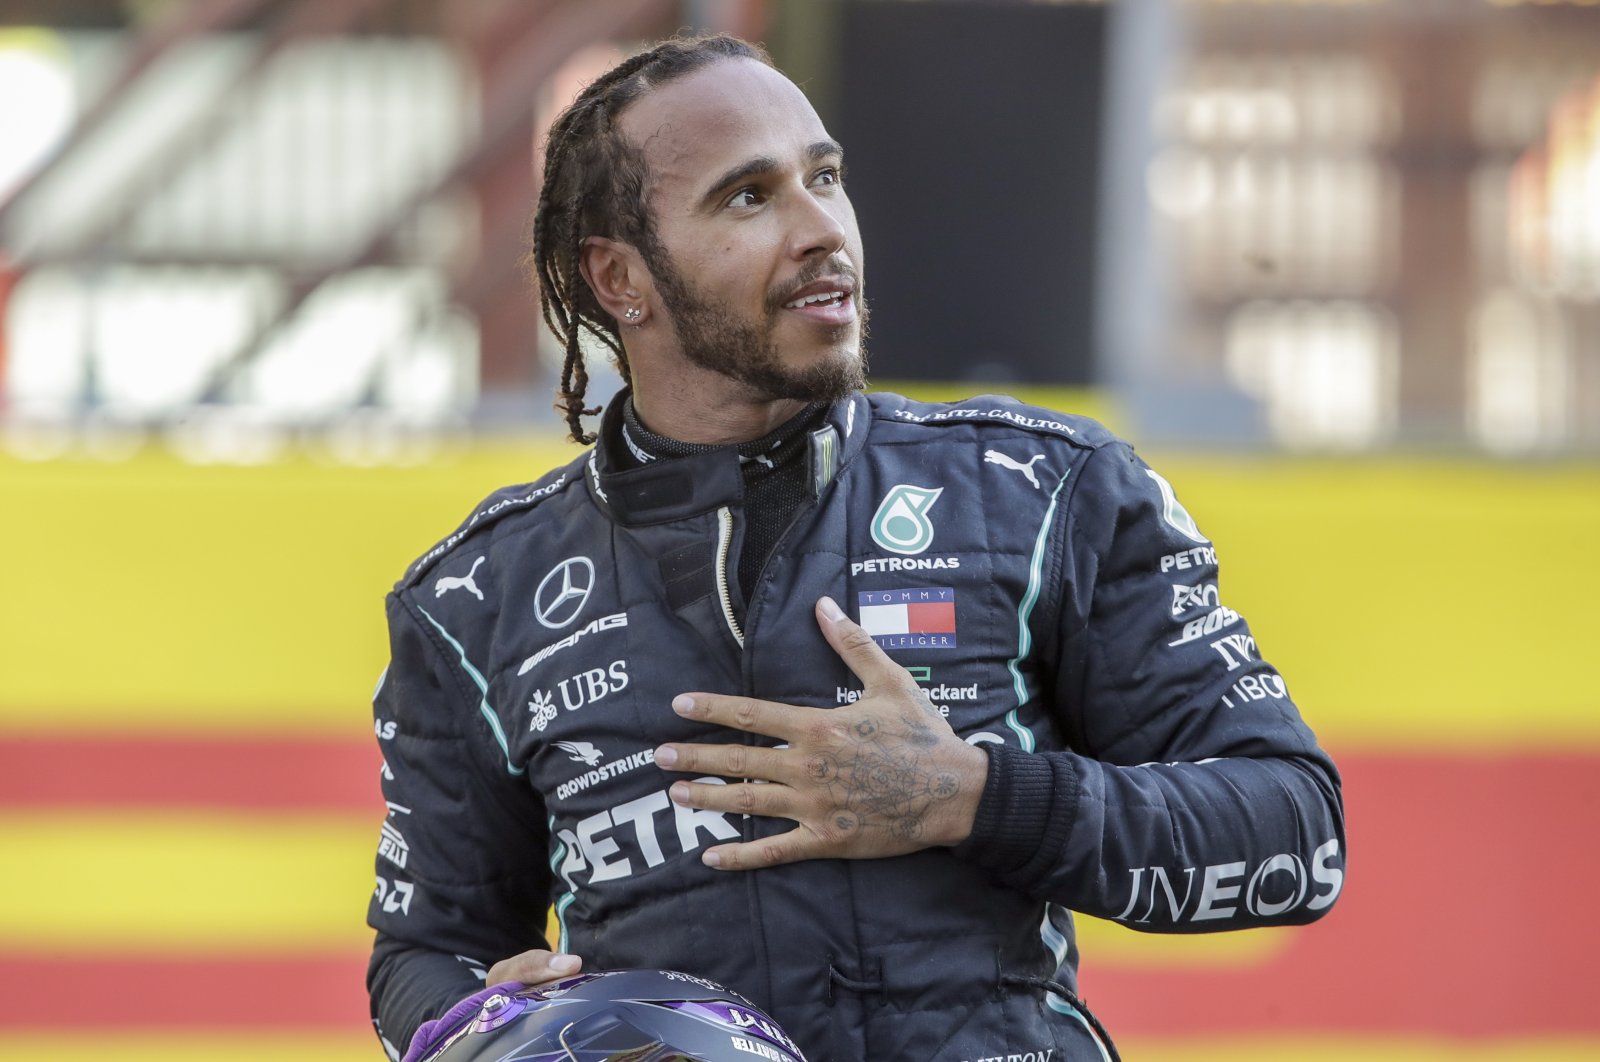 Mercedes driver Lewis Hamilton celebrates after winning the F1 Tuscany Grand Prix, at the Mugello circuit in Scarperia, Italy, Sept. 13, 2020. (AP Photo)